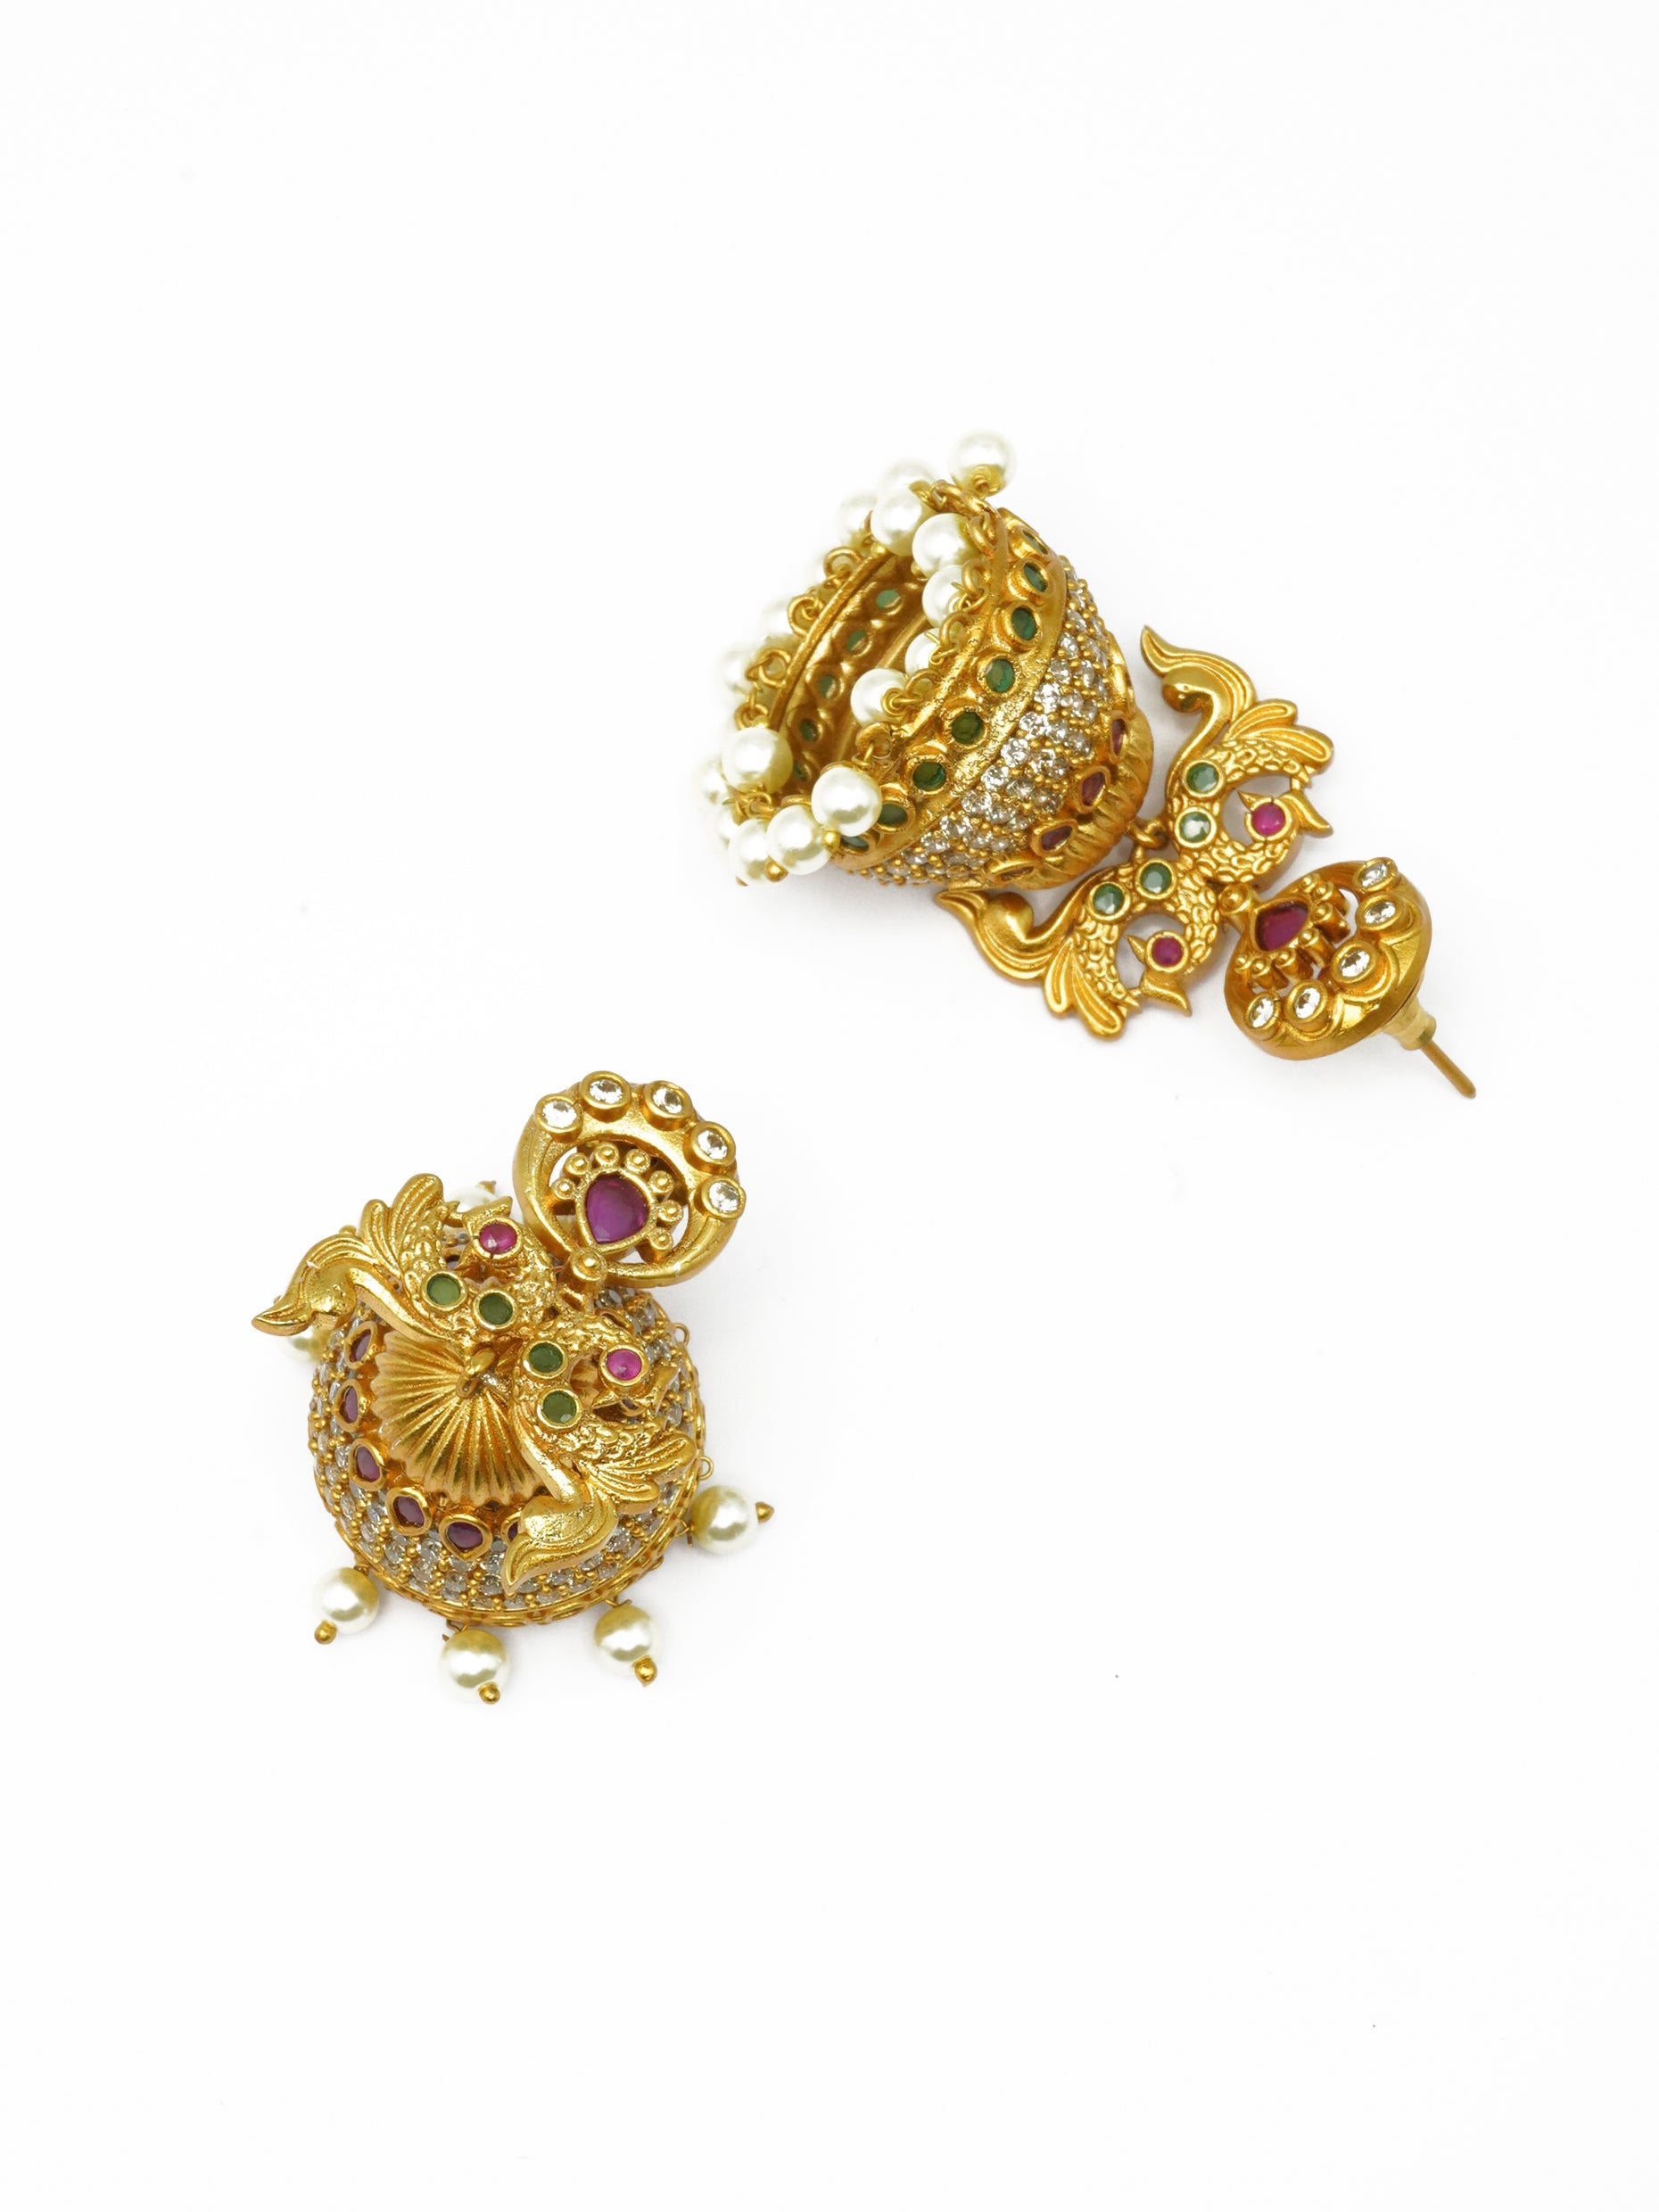 Exclusive Kemp studded Gold Plated Jhumki / Earrings 9564N